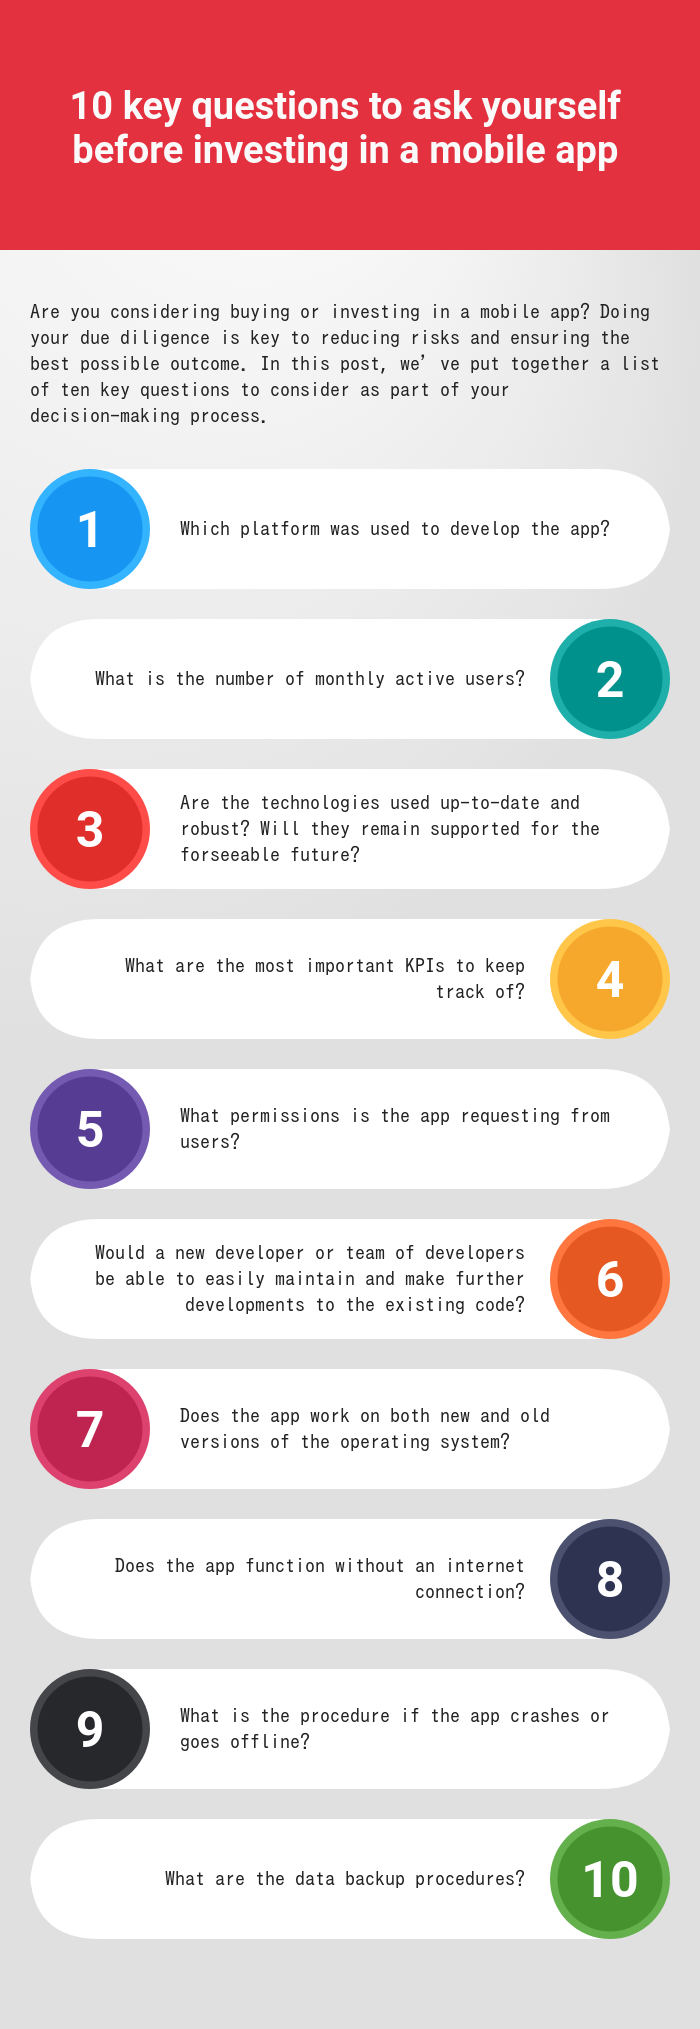 10 key questions to ask yourself before investing in a mobile app